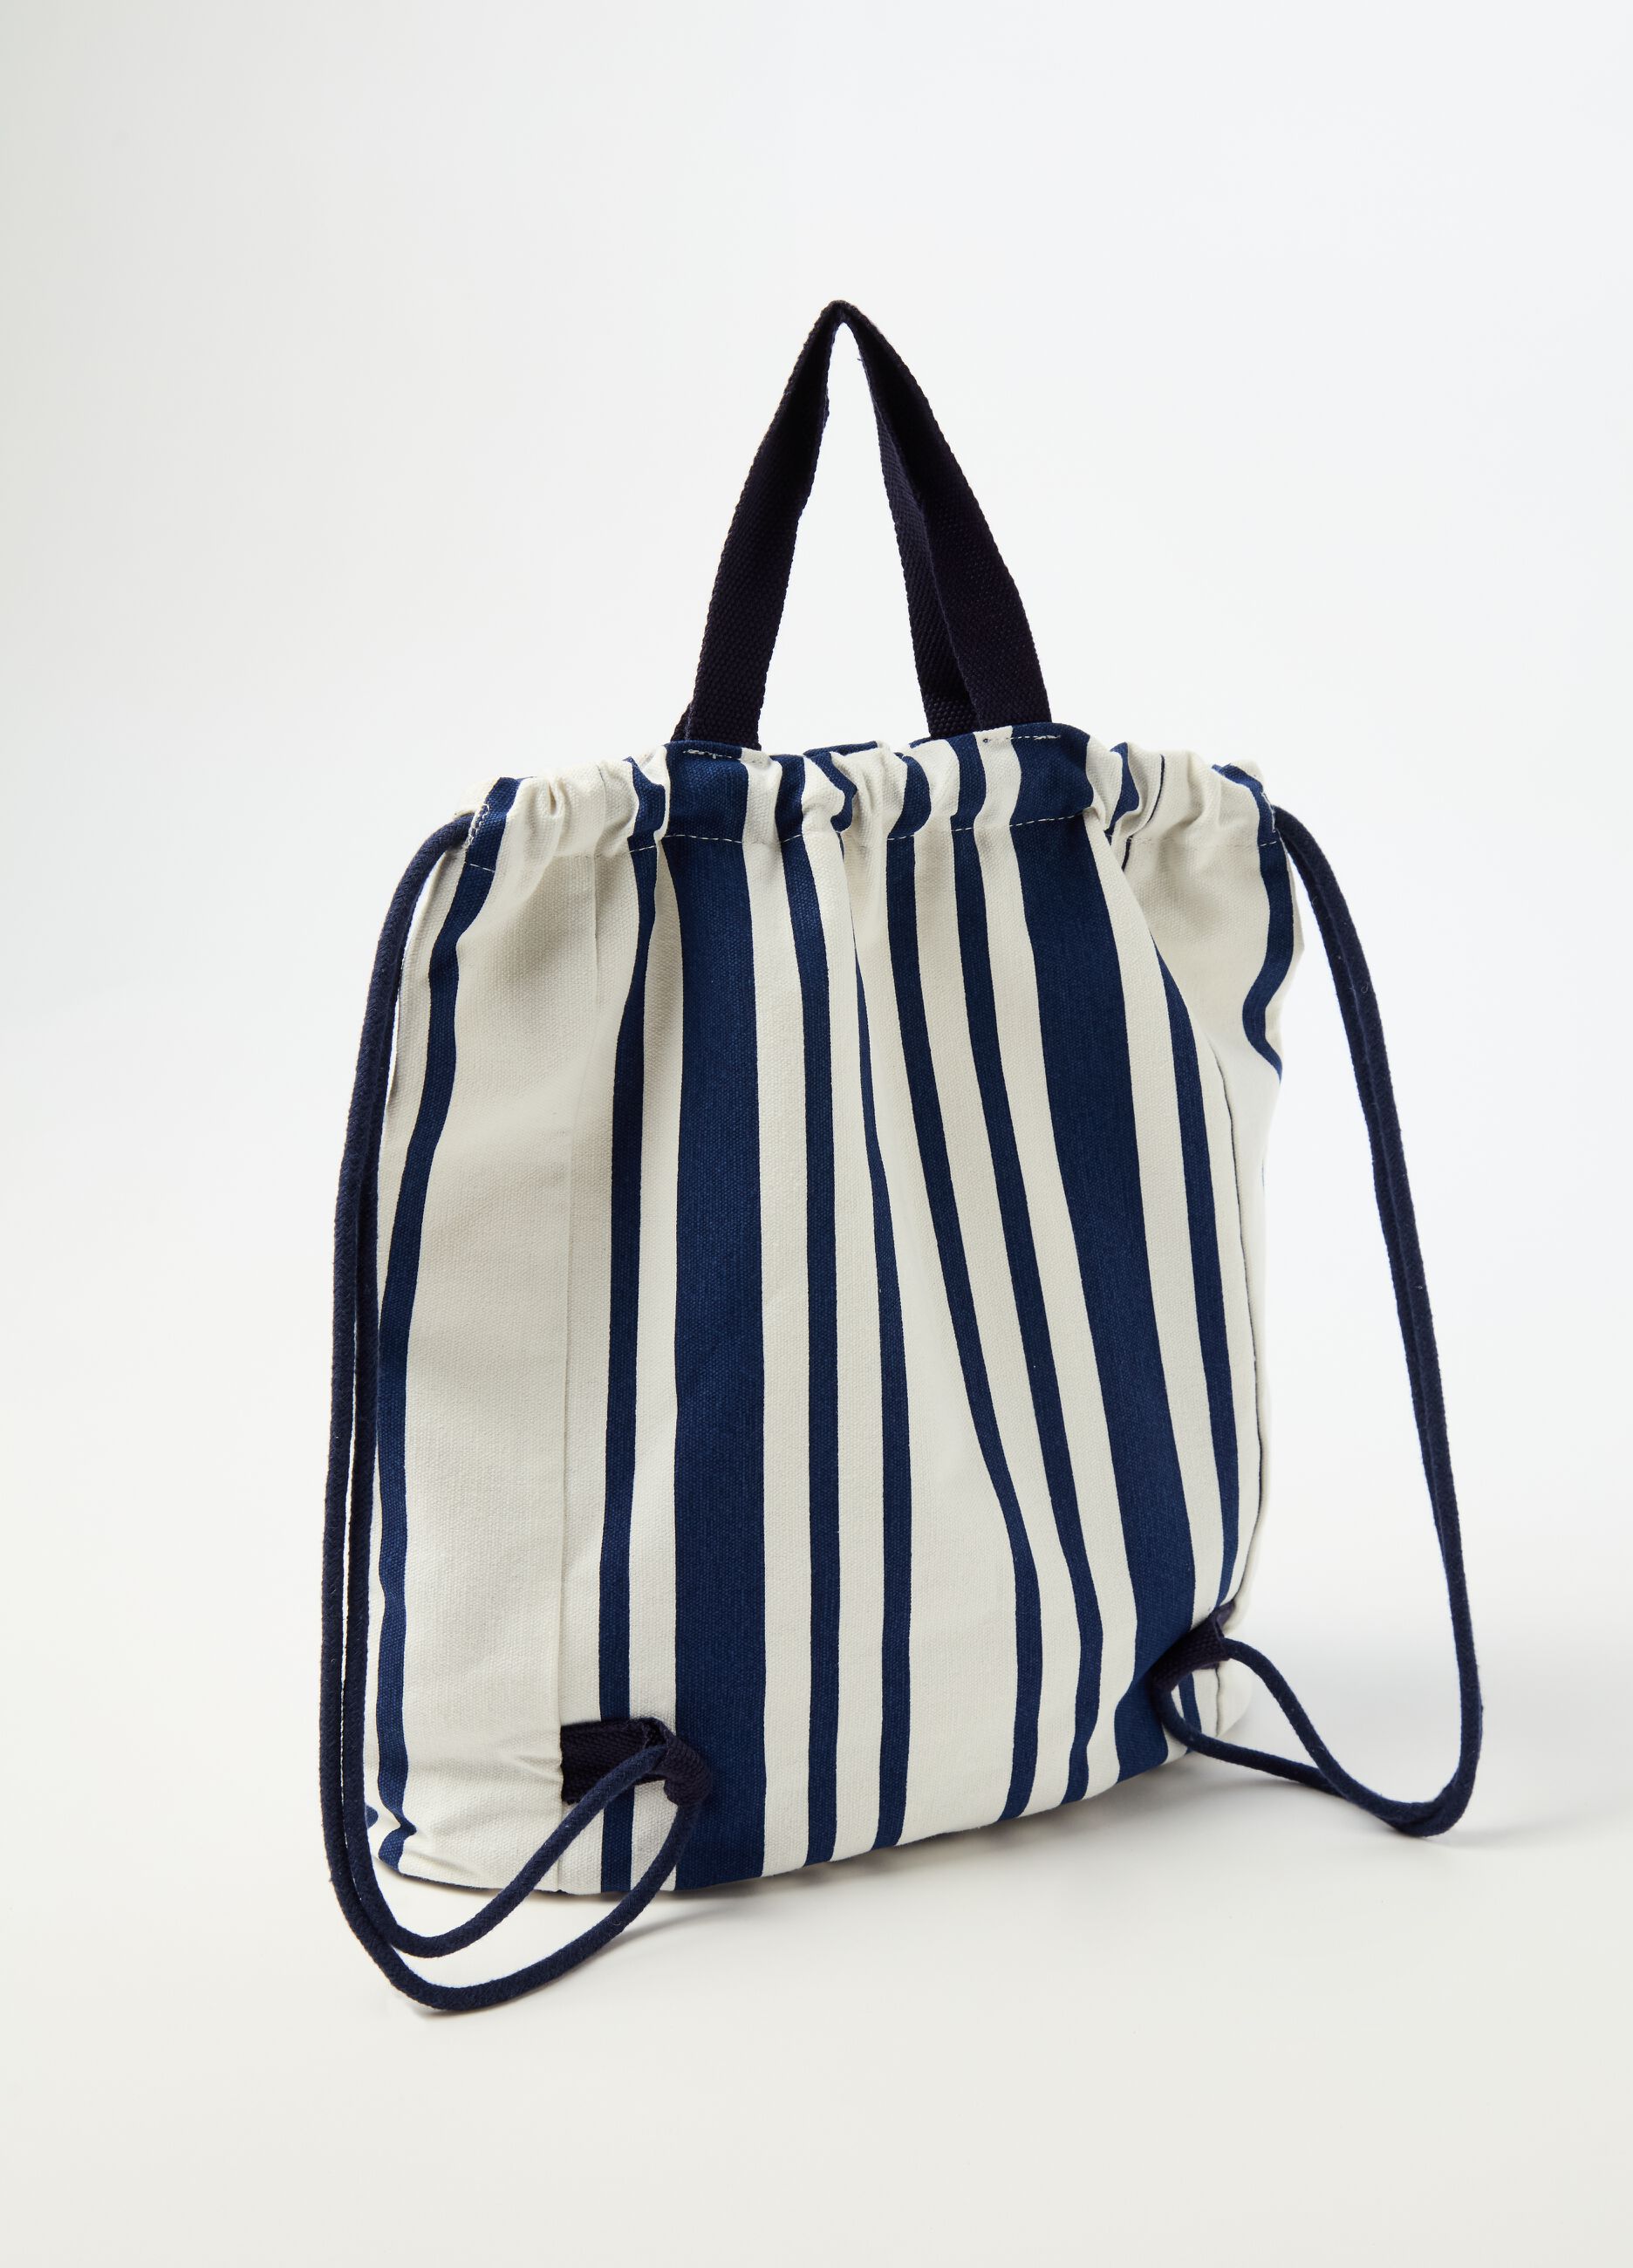 Sack backpack with striped pattern